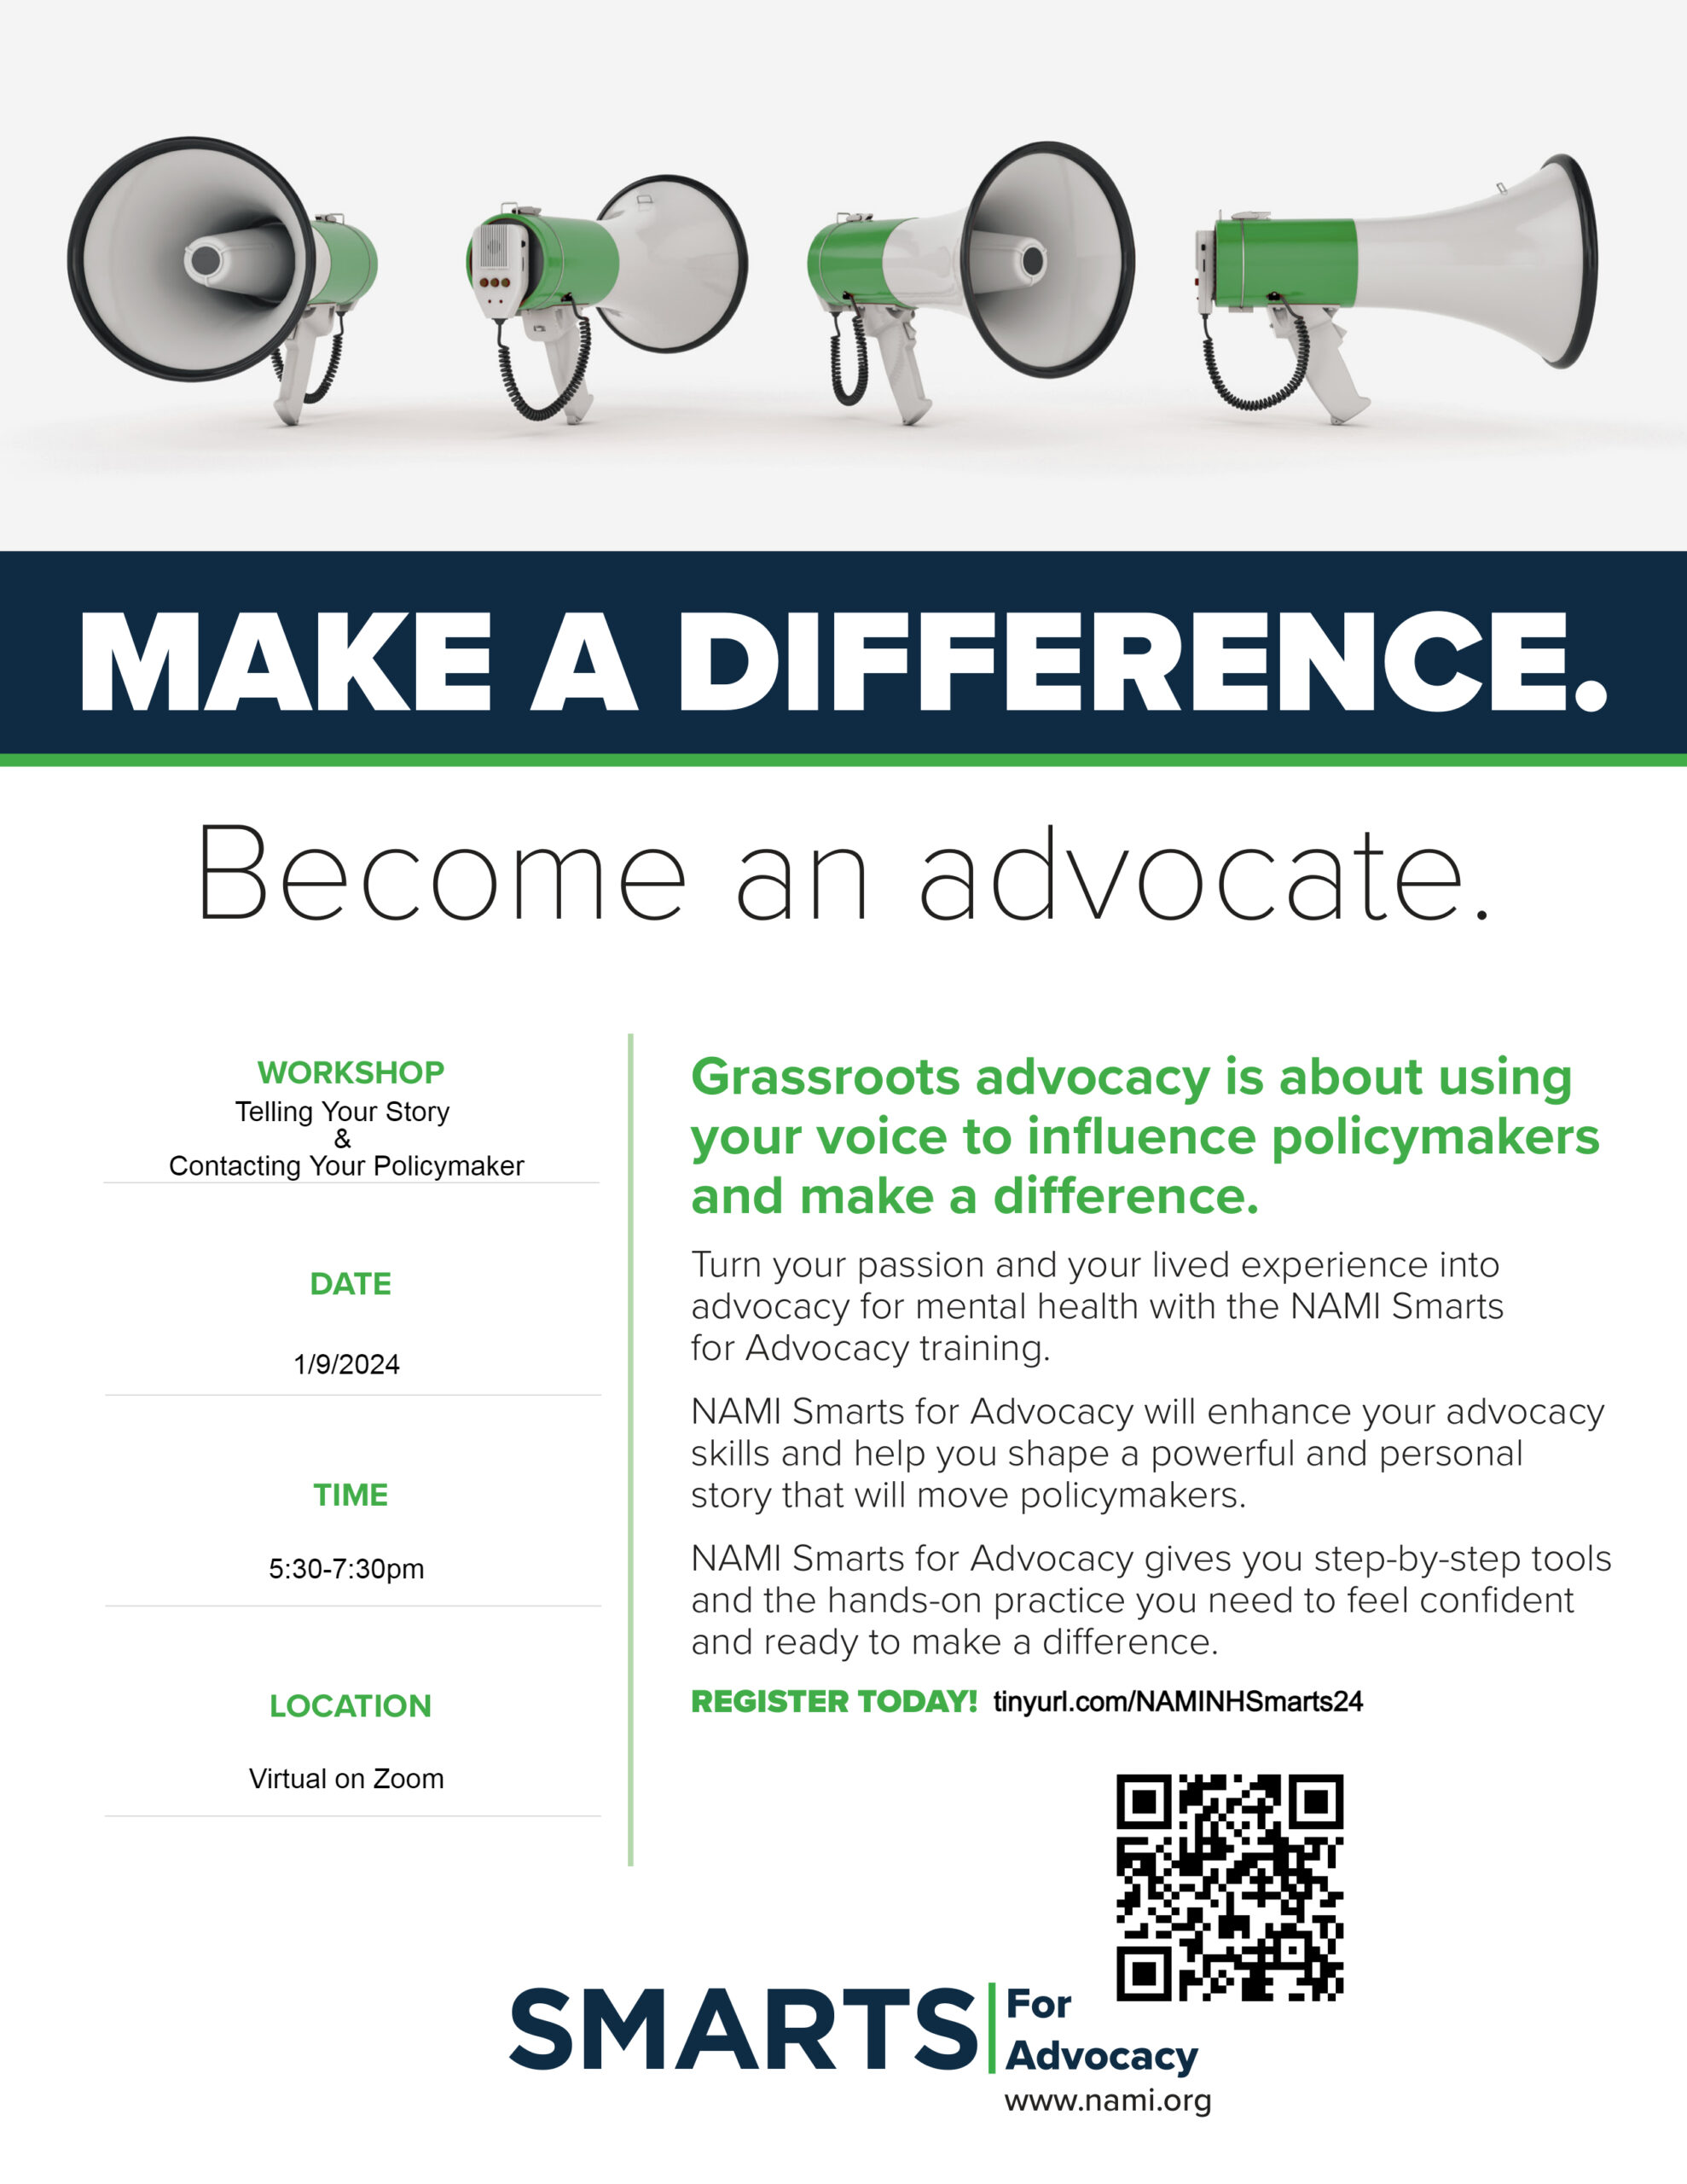 NAMI Smarts for Advocacy: Telling Your Story & Contacting Your Policymaker